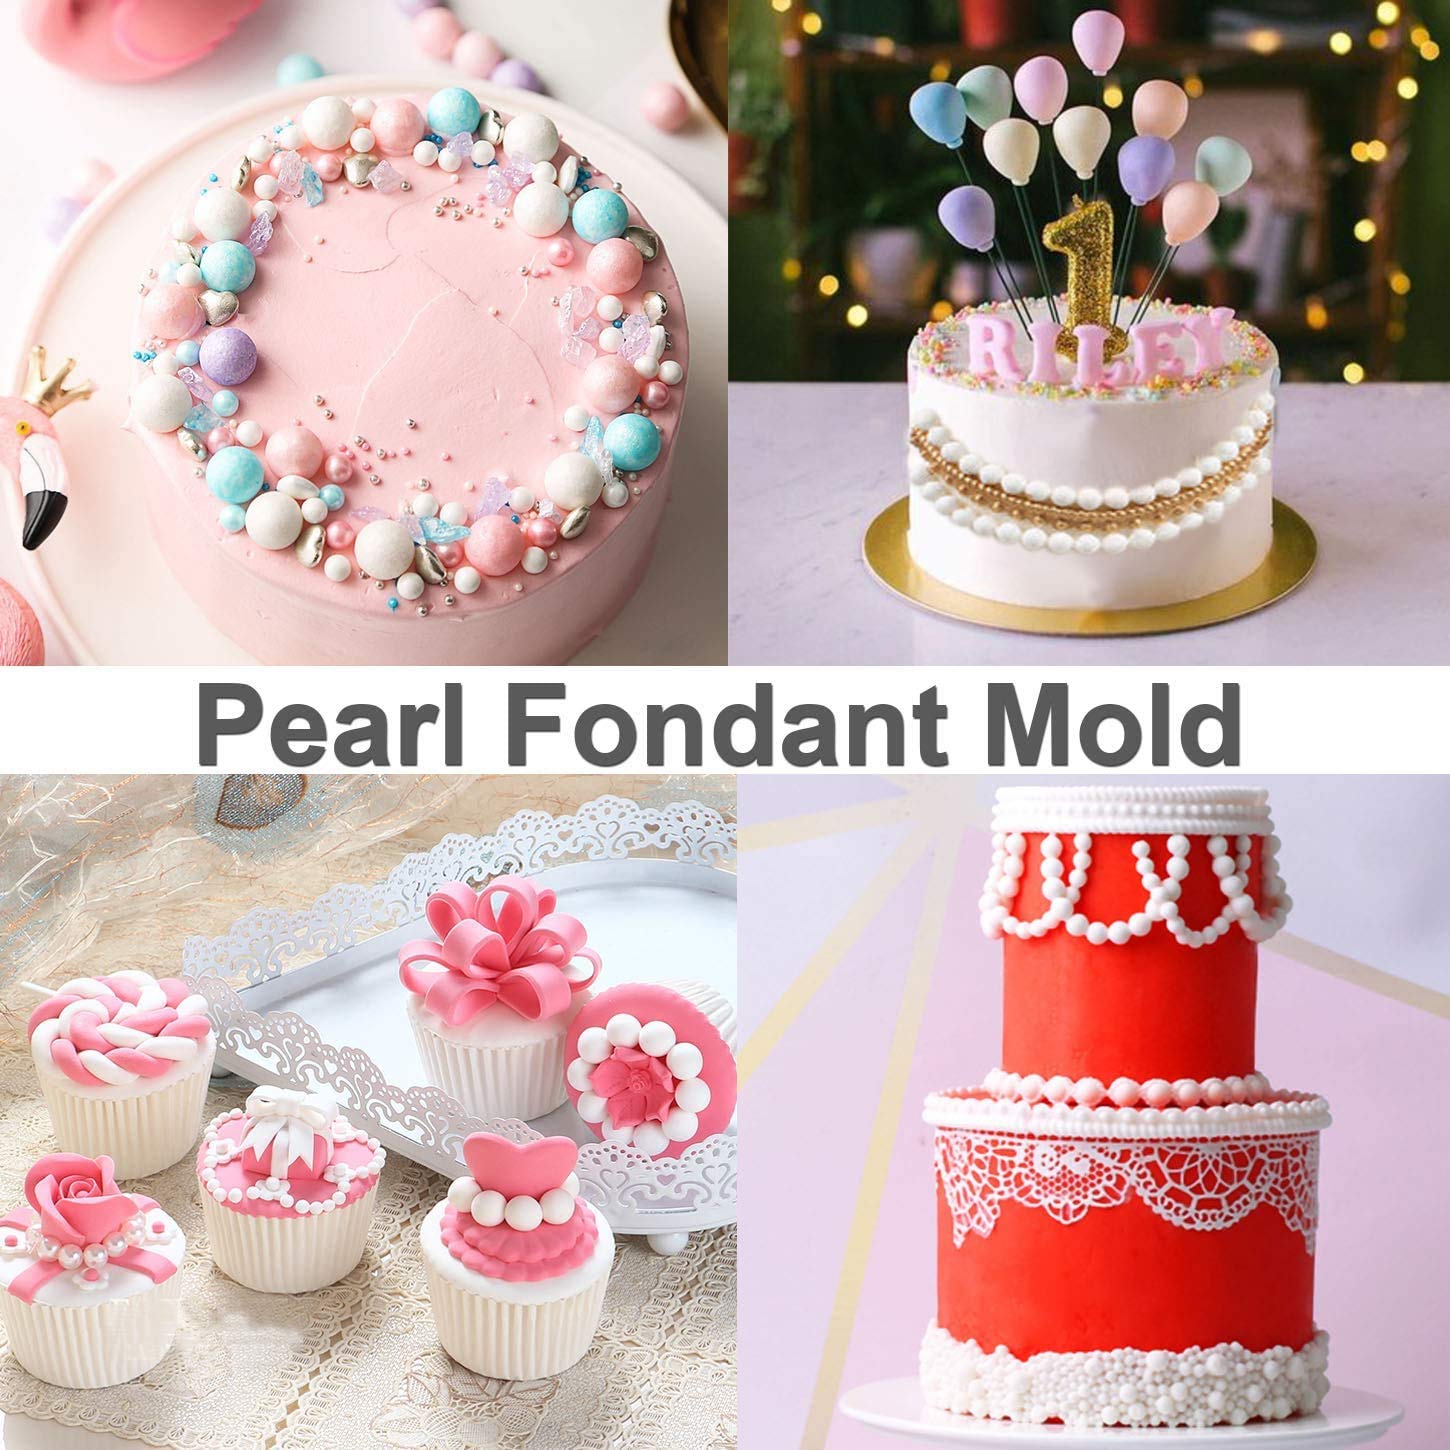 Pearl Fondant Molds Gum Paste Molds 4 Size Round Pearl Chain Silicone Mold for Cupcake Toppers Fondant Candy Chocolate Cake Decoration